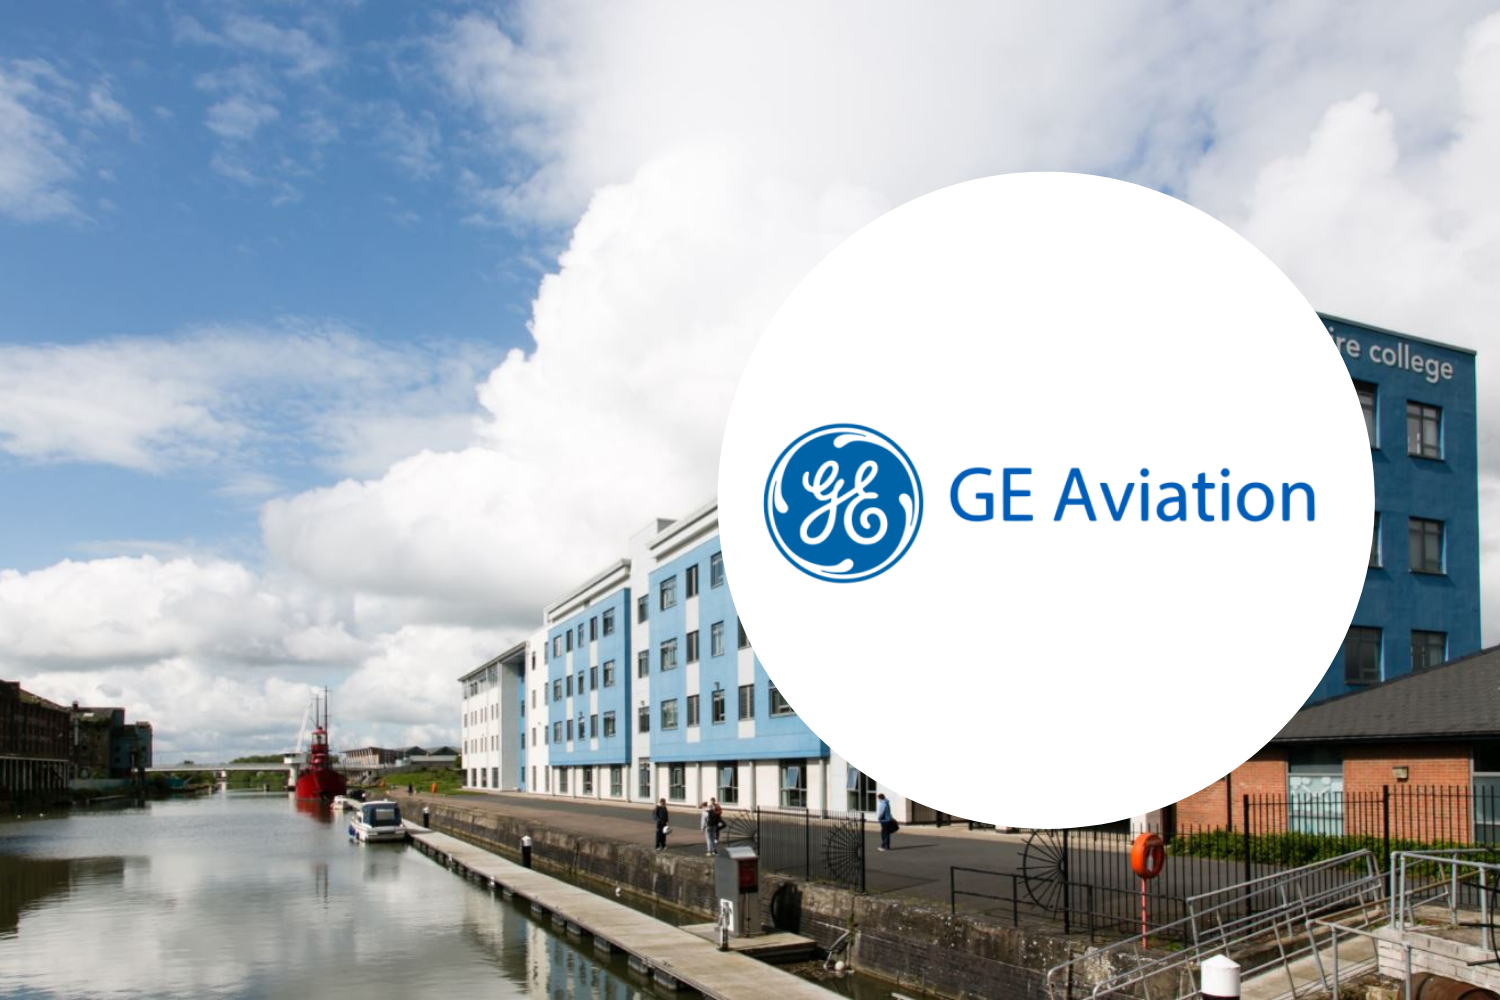 Apprenticeship Case Study: William Lowe, Electrical and Electronic Engineering Apprentice at GE Aviation